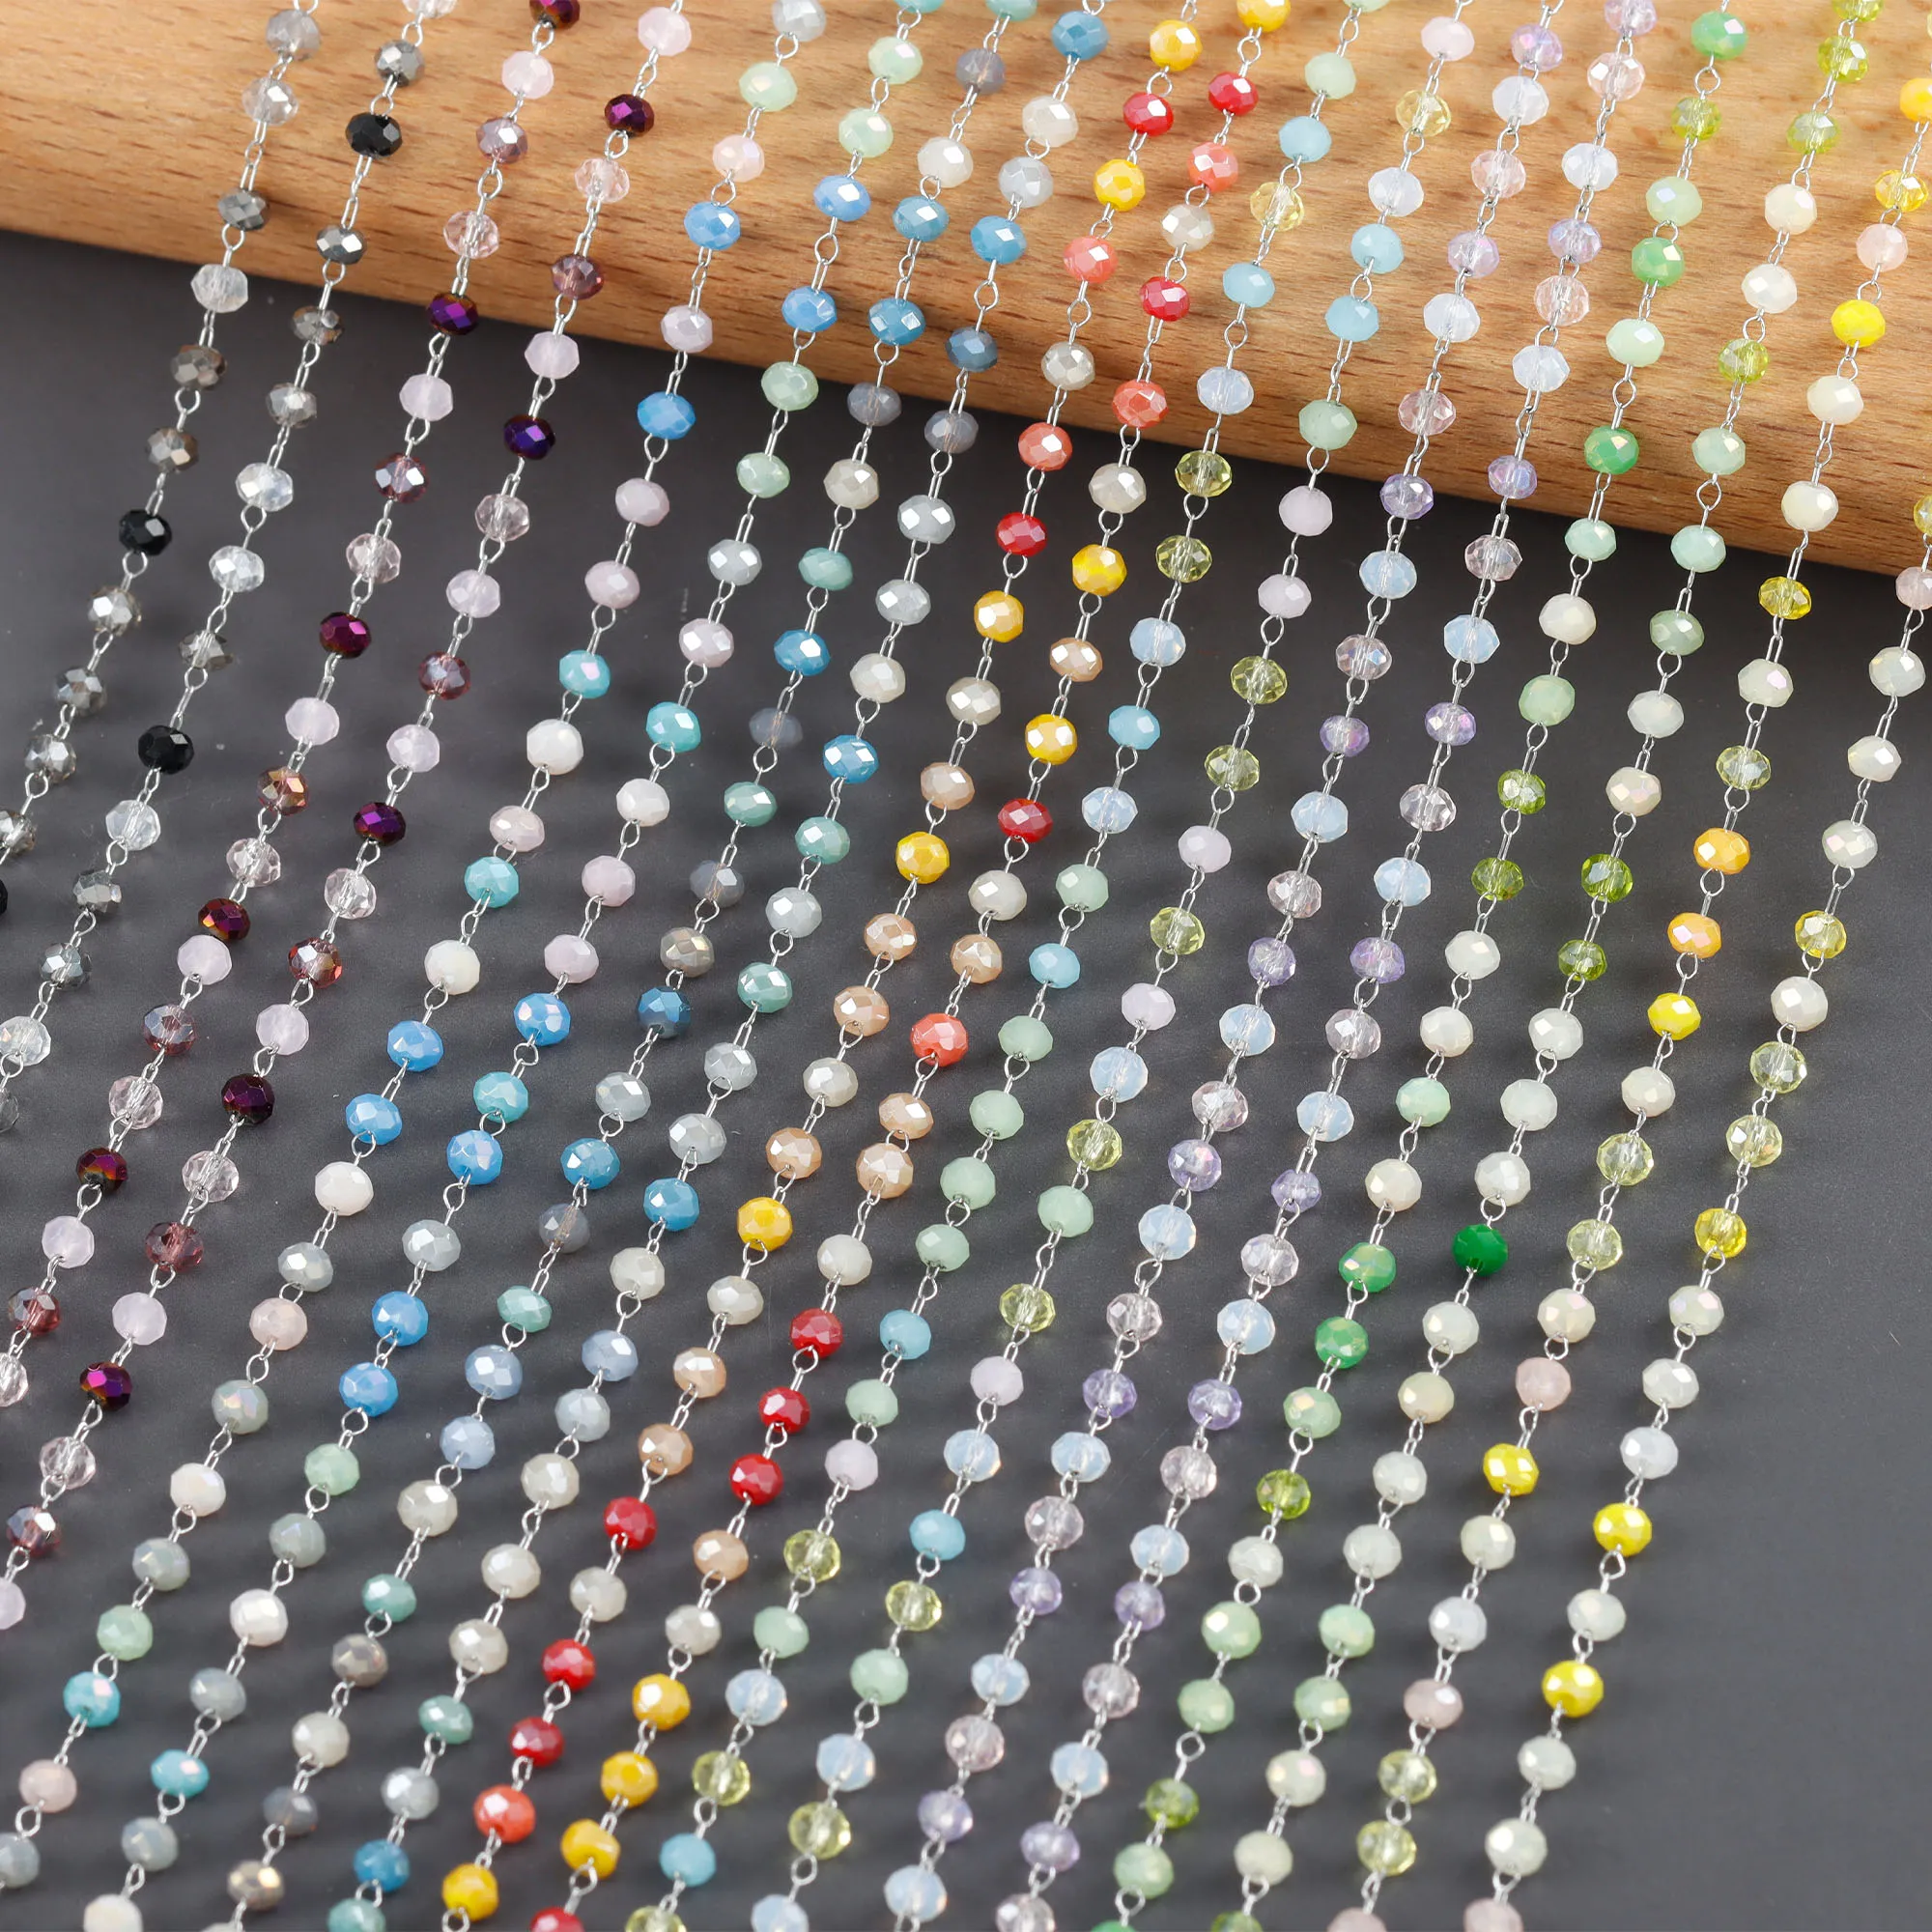 

Multi Color Stainless Steel Bead Chain Diy Necklace Charms For Jewelry Making Accessories C252, Picture shown